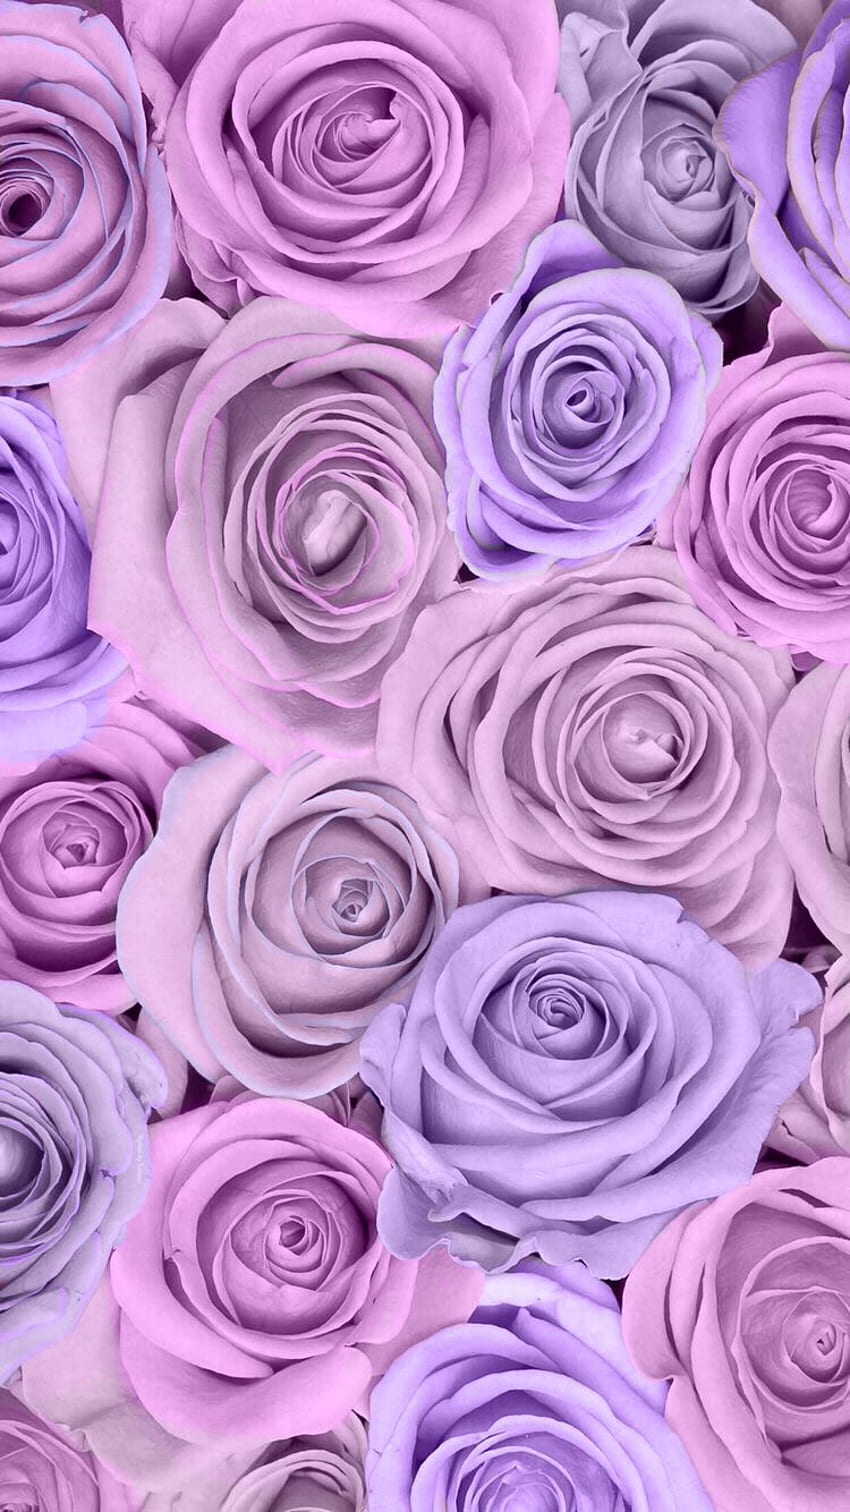 Purple Flower Wallpaper For IPhone 77 images